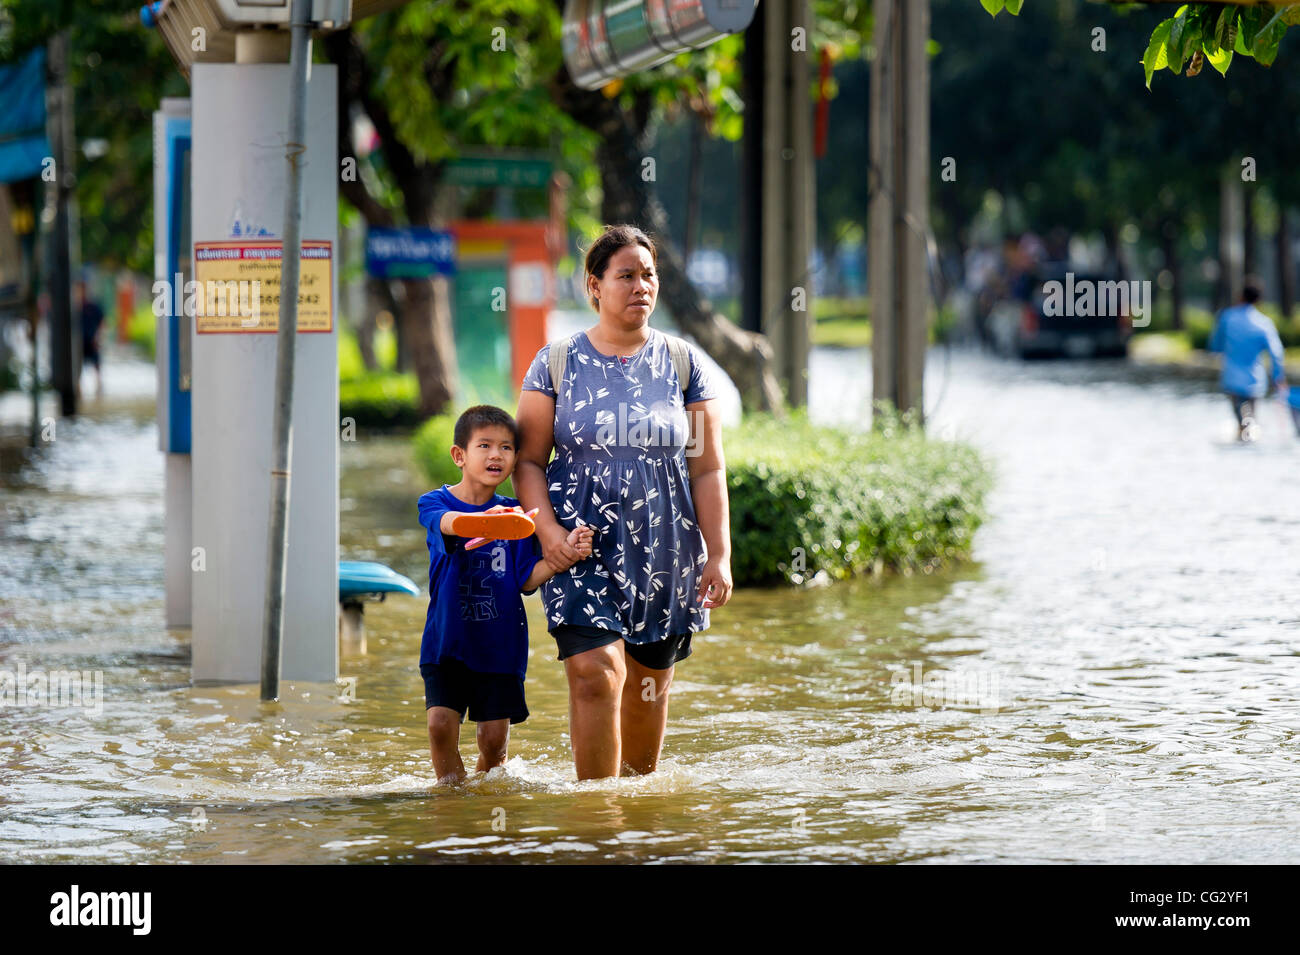 Nov. 10, 2011 - Bangkok, Thailand - Thai residents wade through floodwaters in Bangkok, Thailand. Floodwaters are creeping further into city's center. Thailand is suffering from worst flooding in 50 years. Over 400 people have died due to flooding since late July according to Department of Disaster  Stock Photo